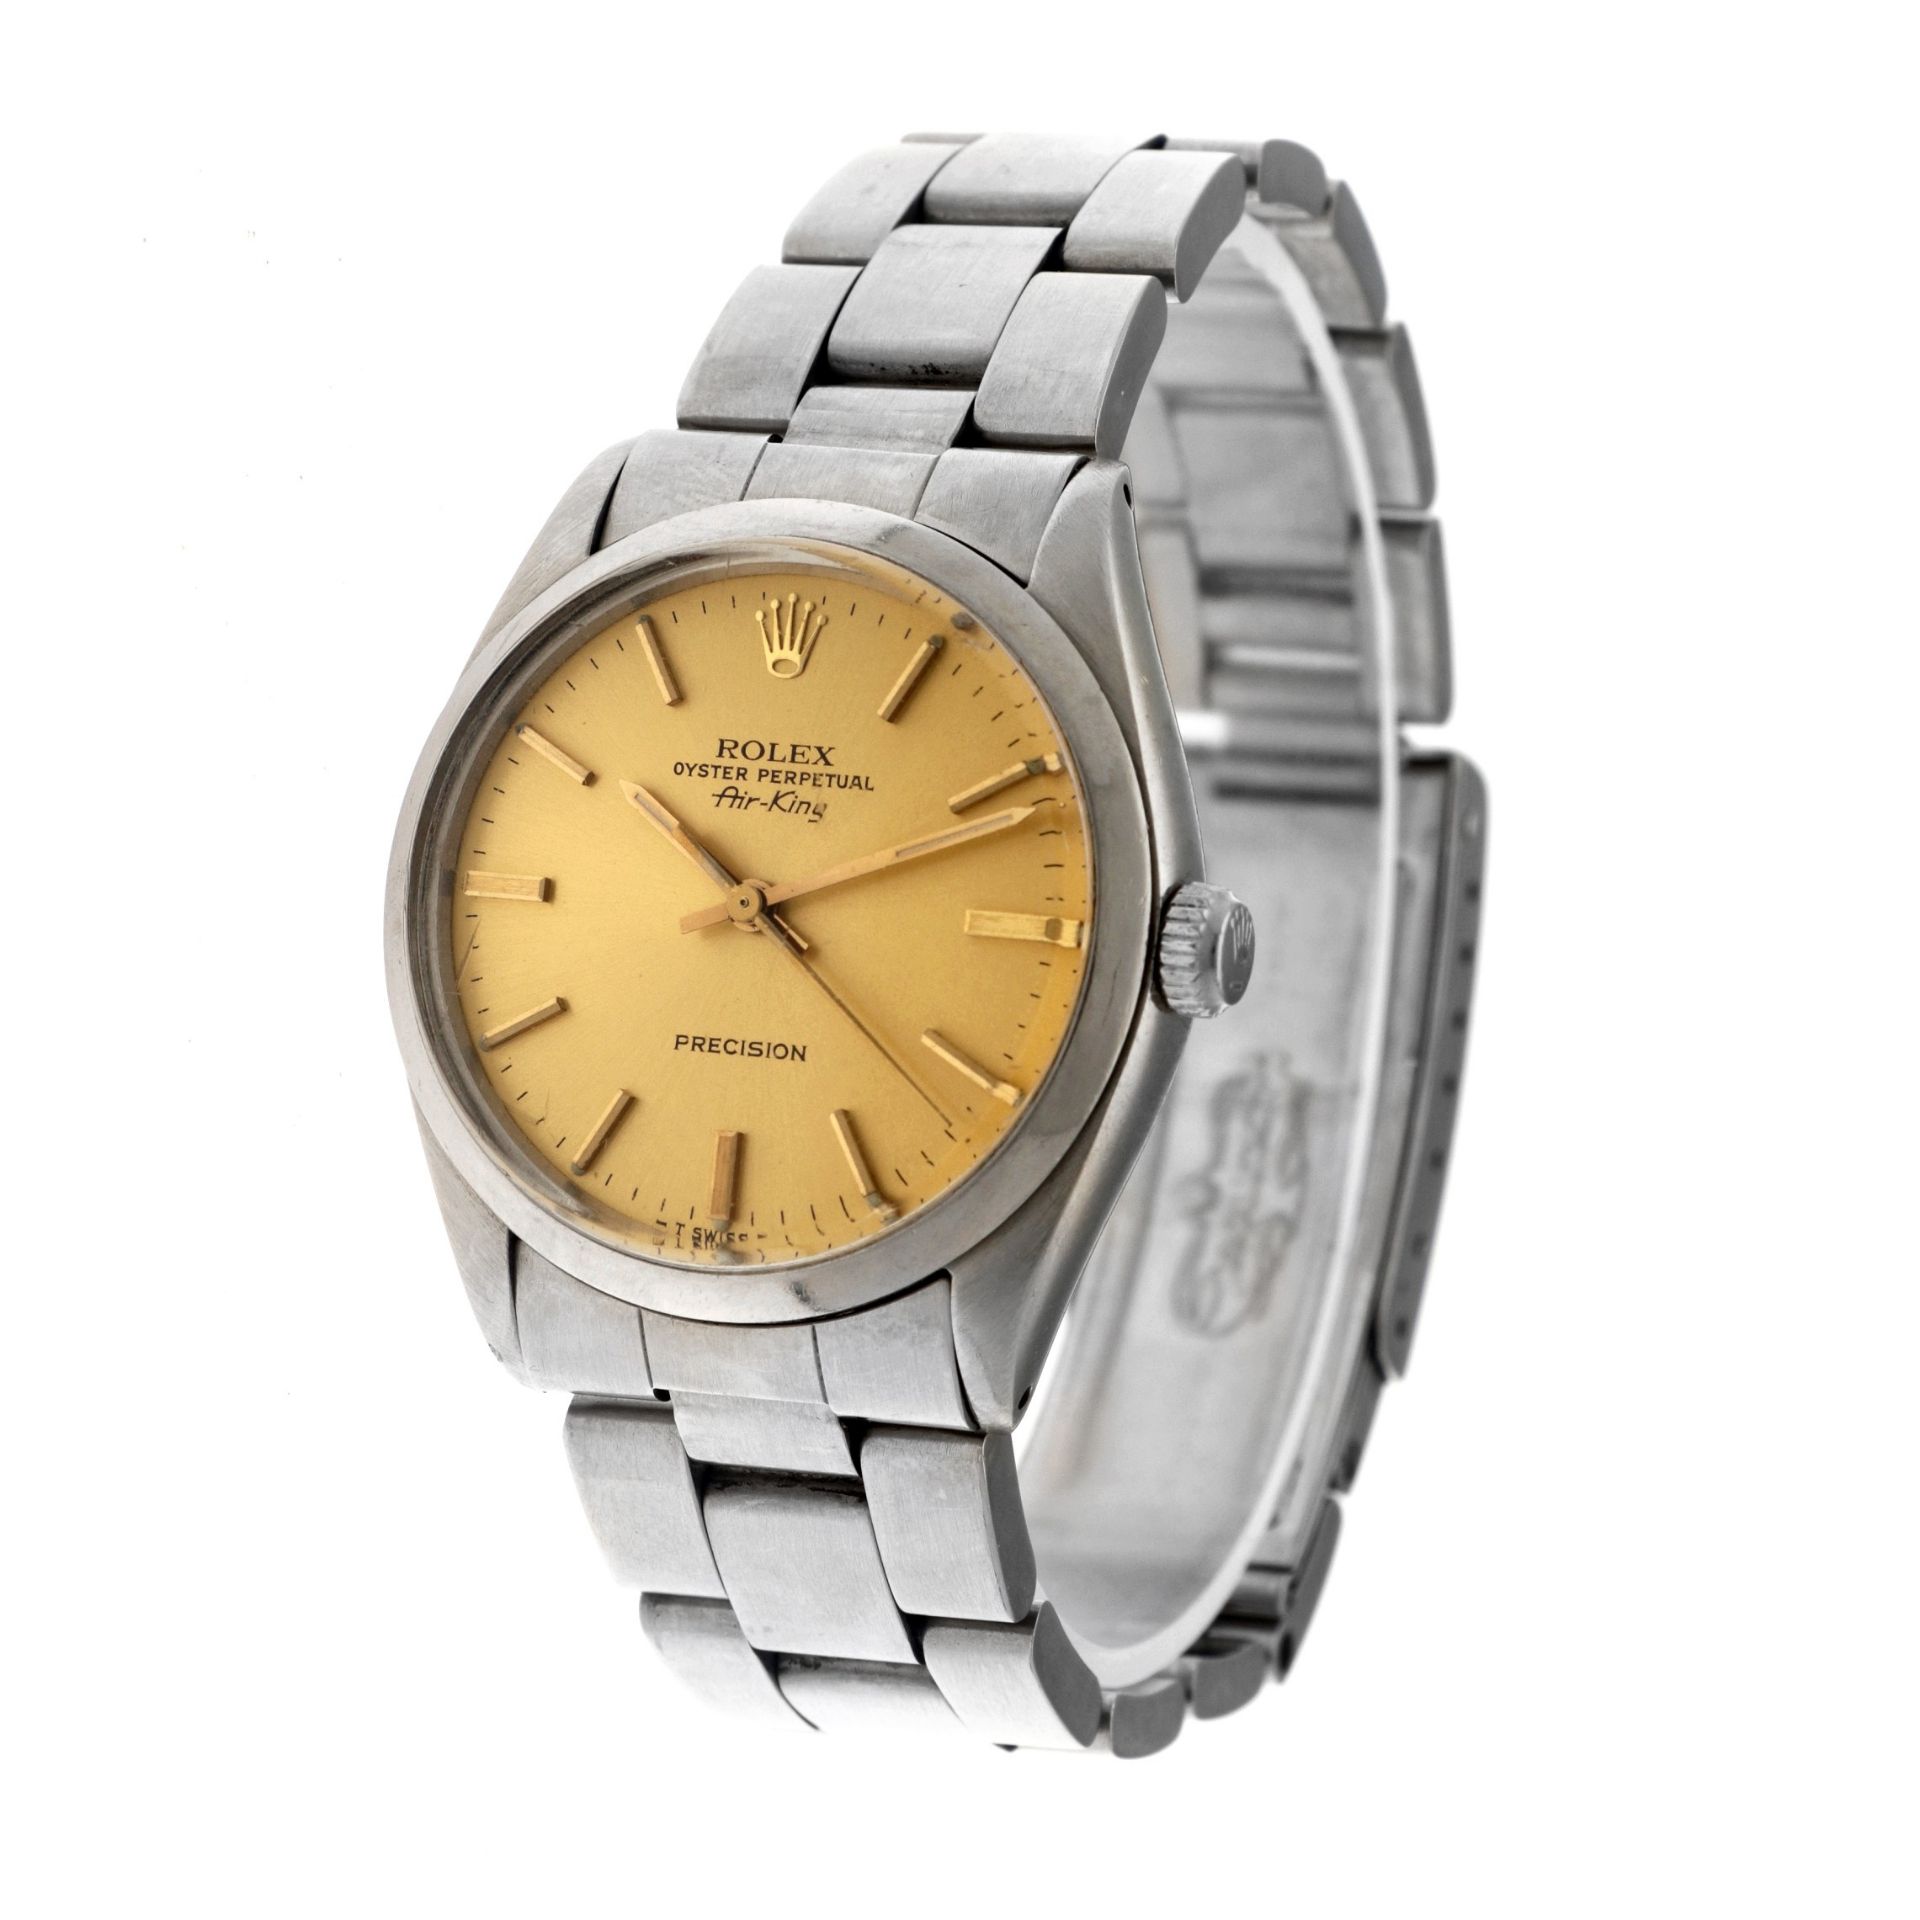 No Reserve - Rolex Air-King 5500 - Men's watch - approx. 1988. - Image 2 of 5